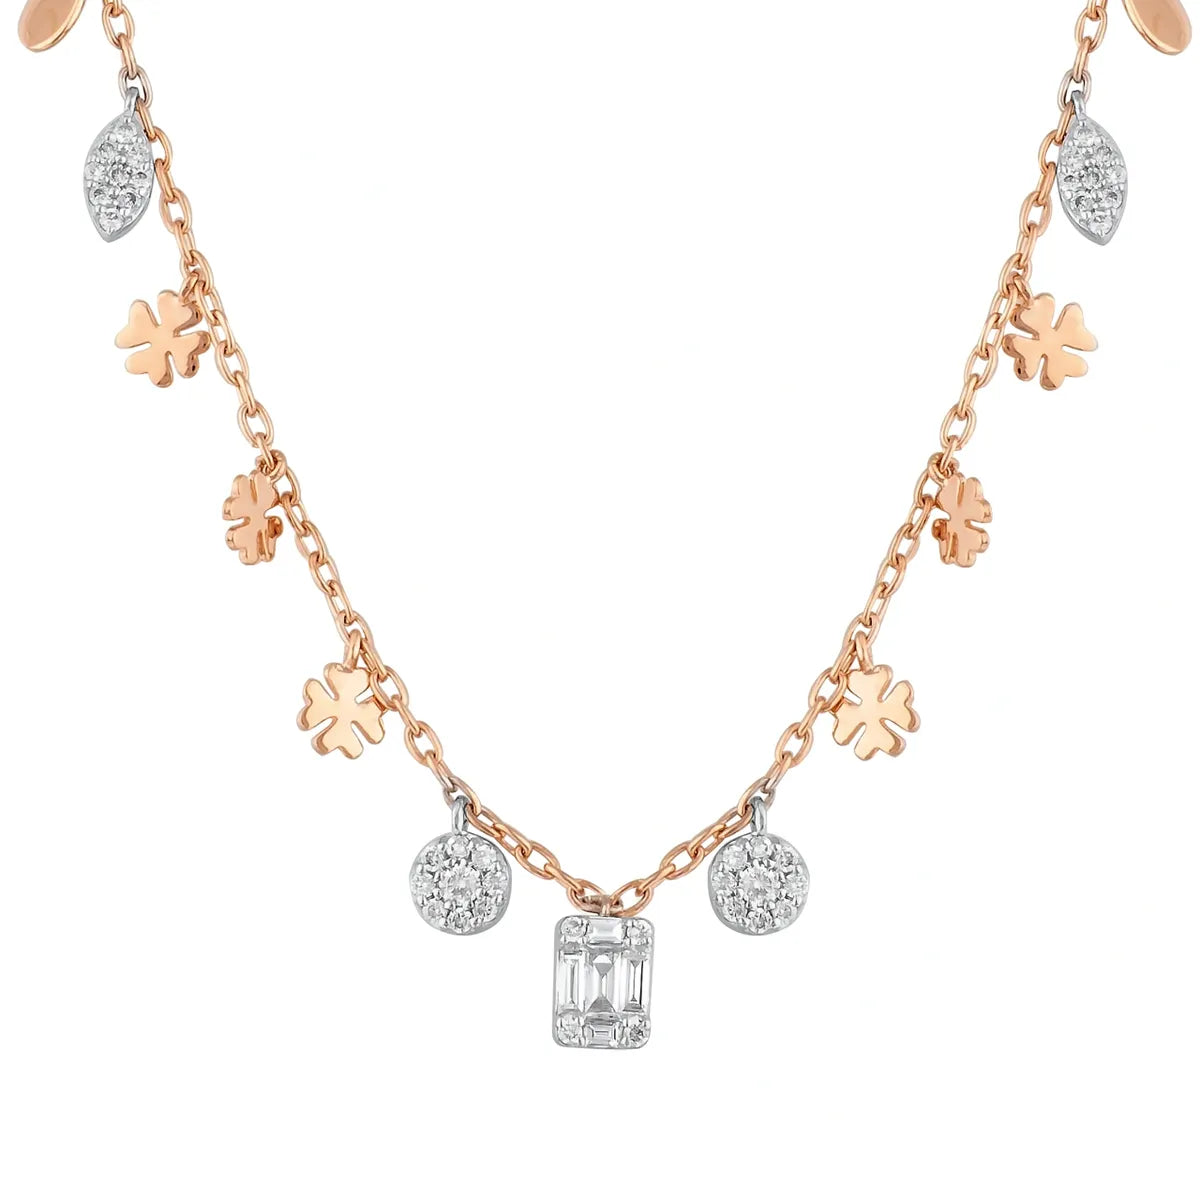 Stylish 14K Rose Gold and White Gold Necklace and Diamond